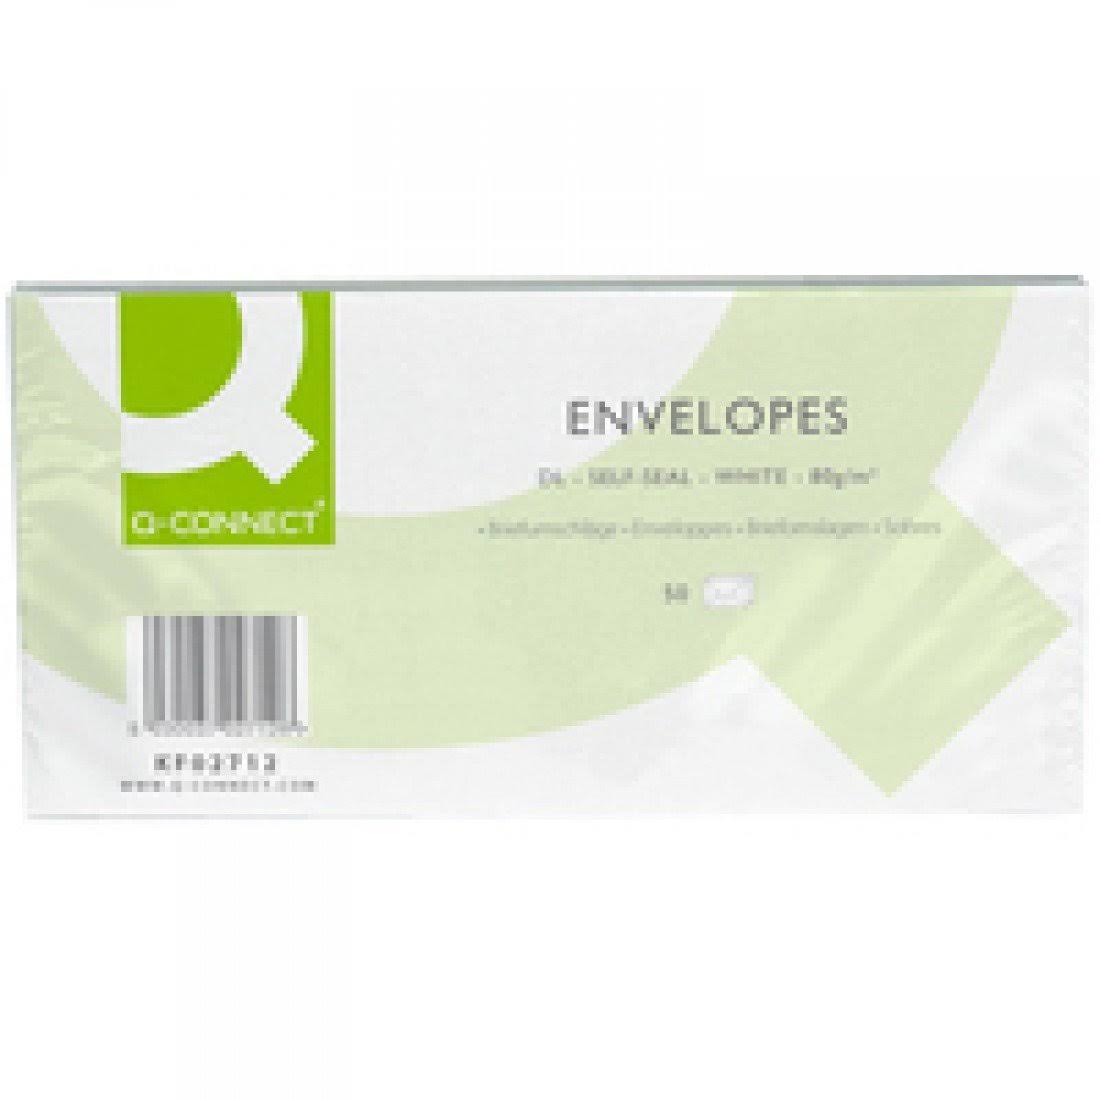 Q-Connect Self-Seal Envelopes (DL) 80gsm White (Pack of 50) KF02712